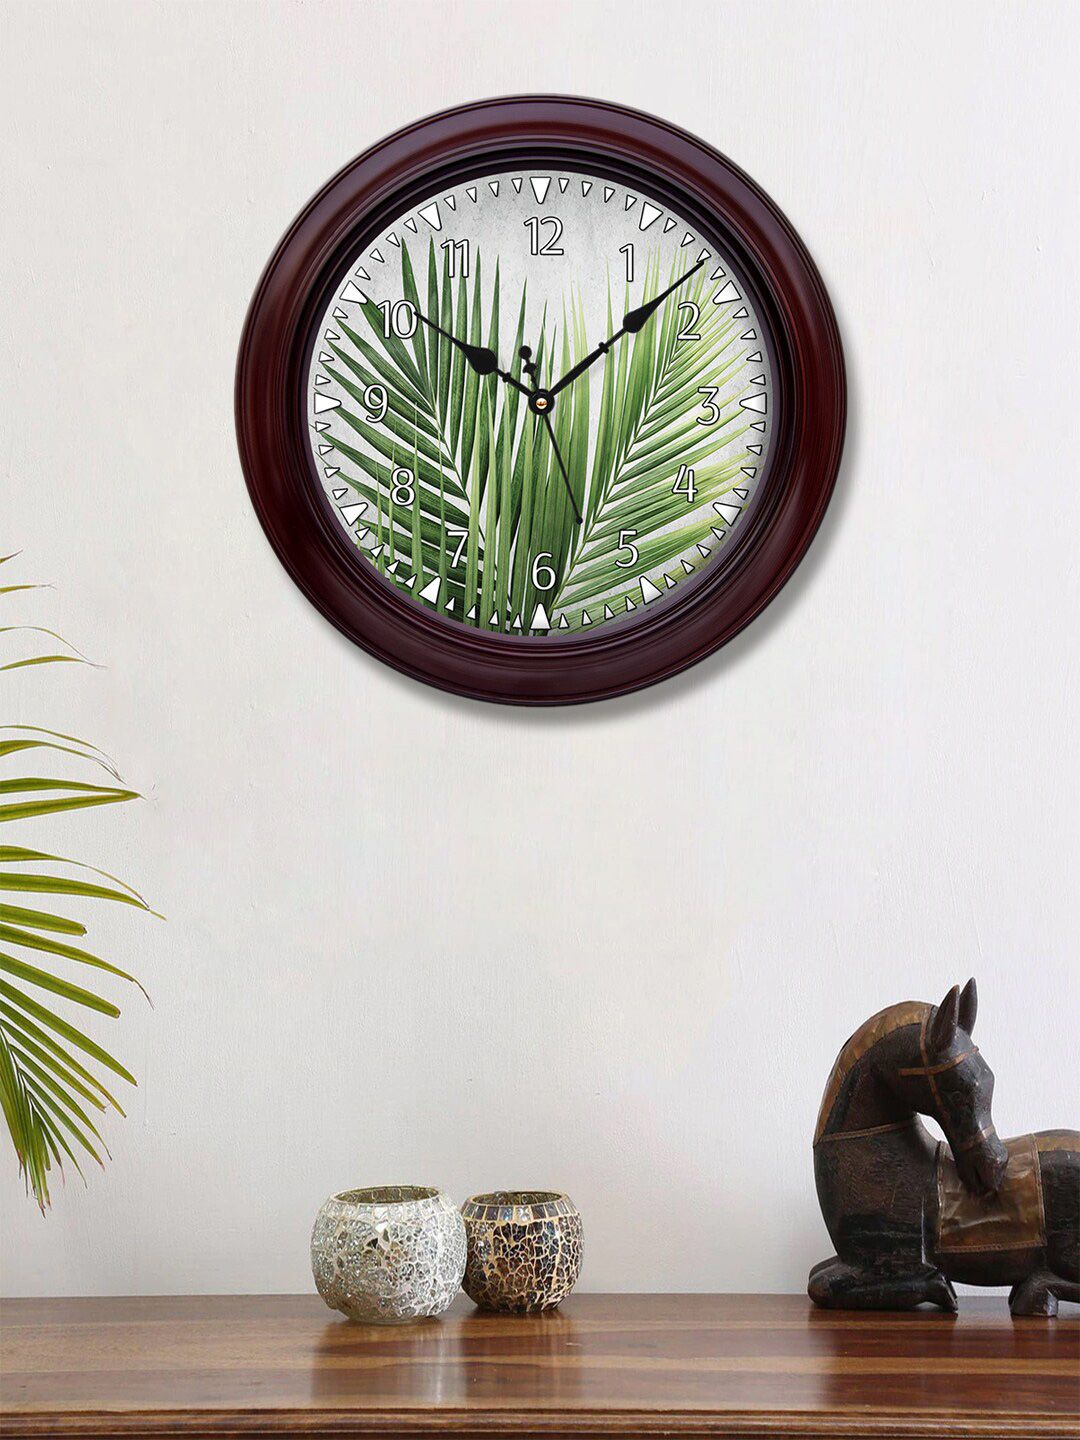 999Store Multicolour Printed Round Analogue Wall Clock Price in India